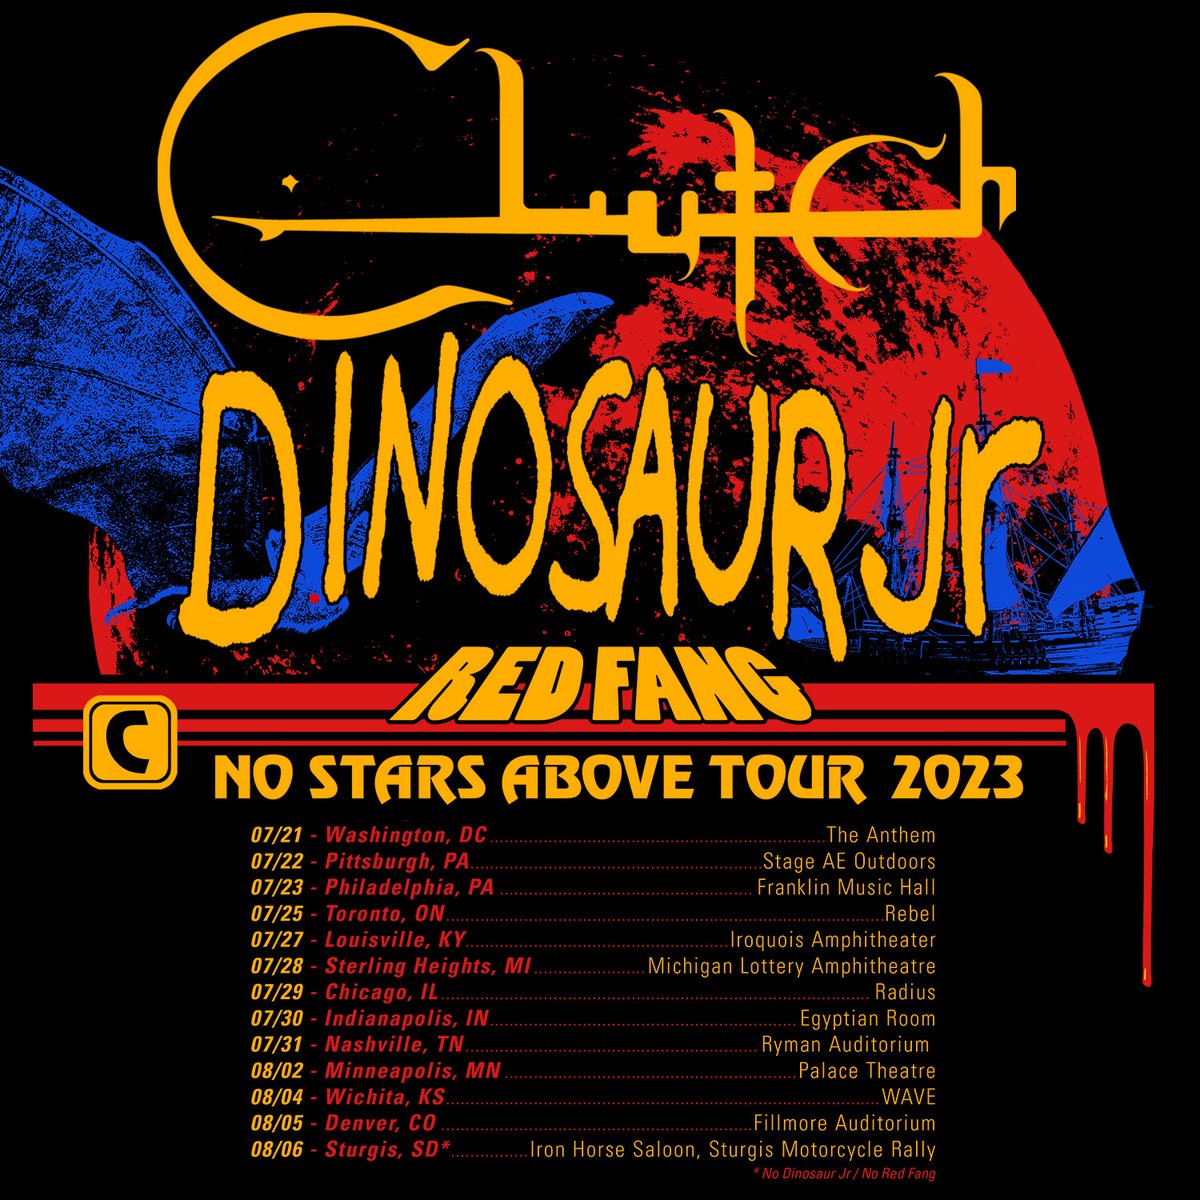 New Summer US tour dates with @clutchofficial & @dinosaurjr! Tickets on sale Fri, 3/17 @ 10am local time